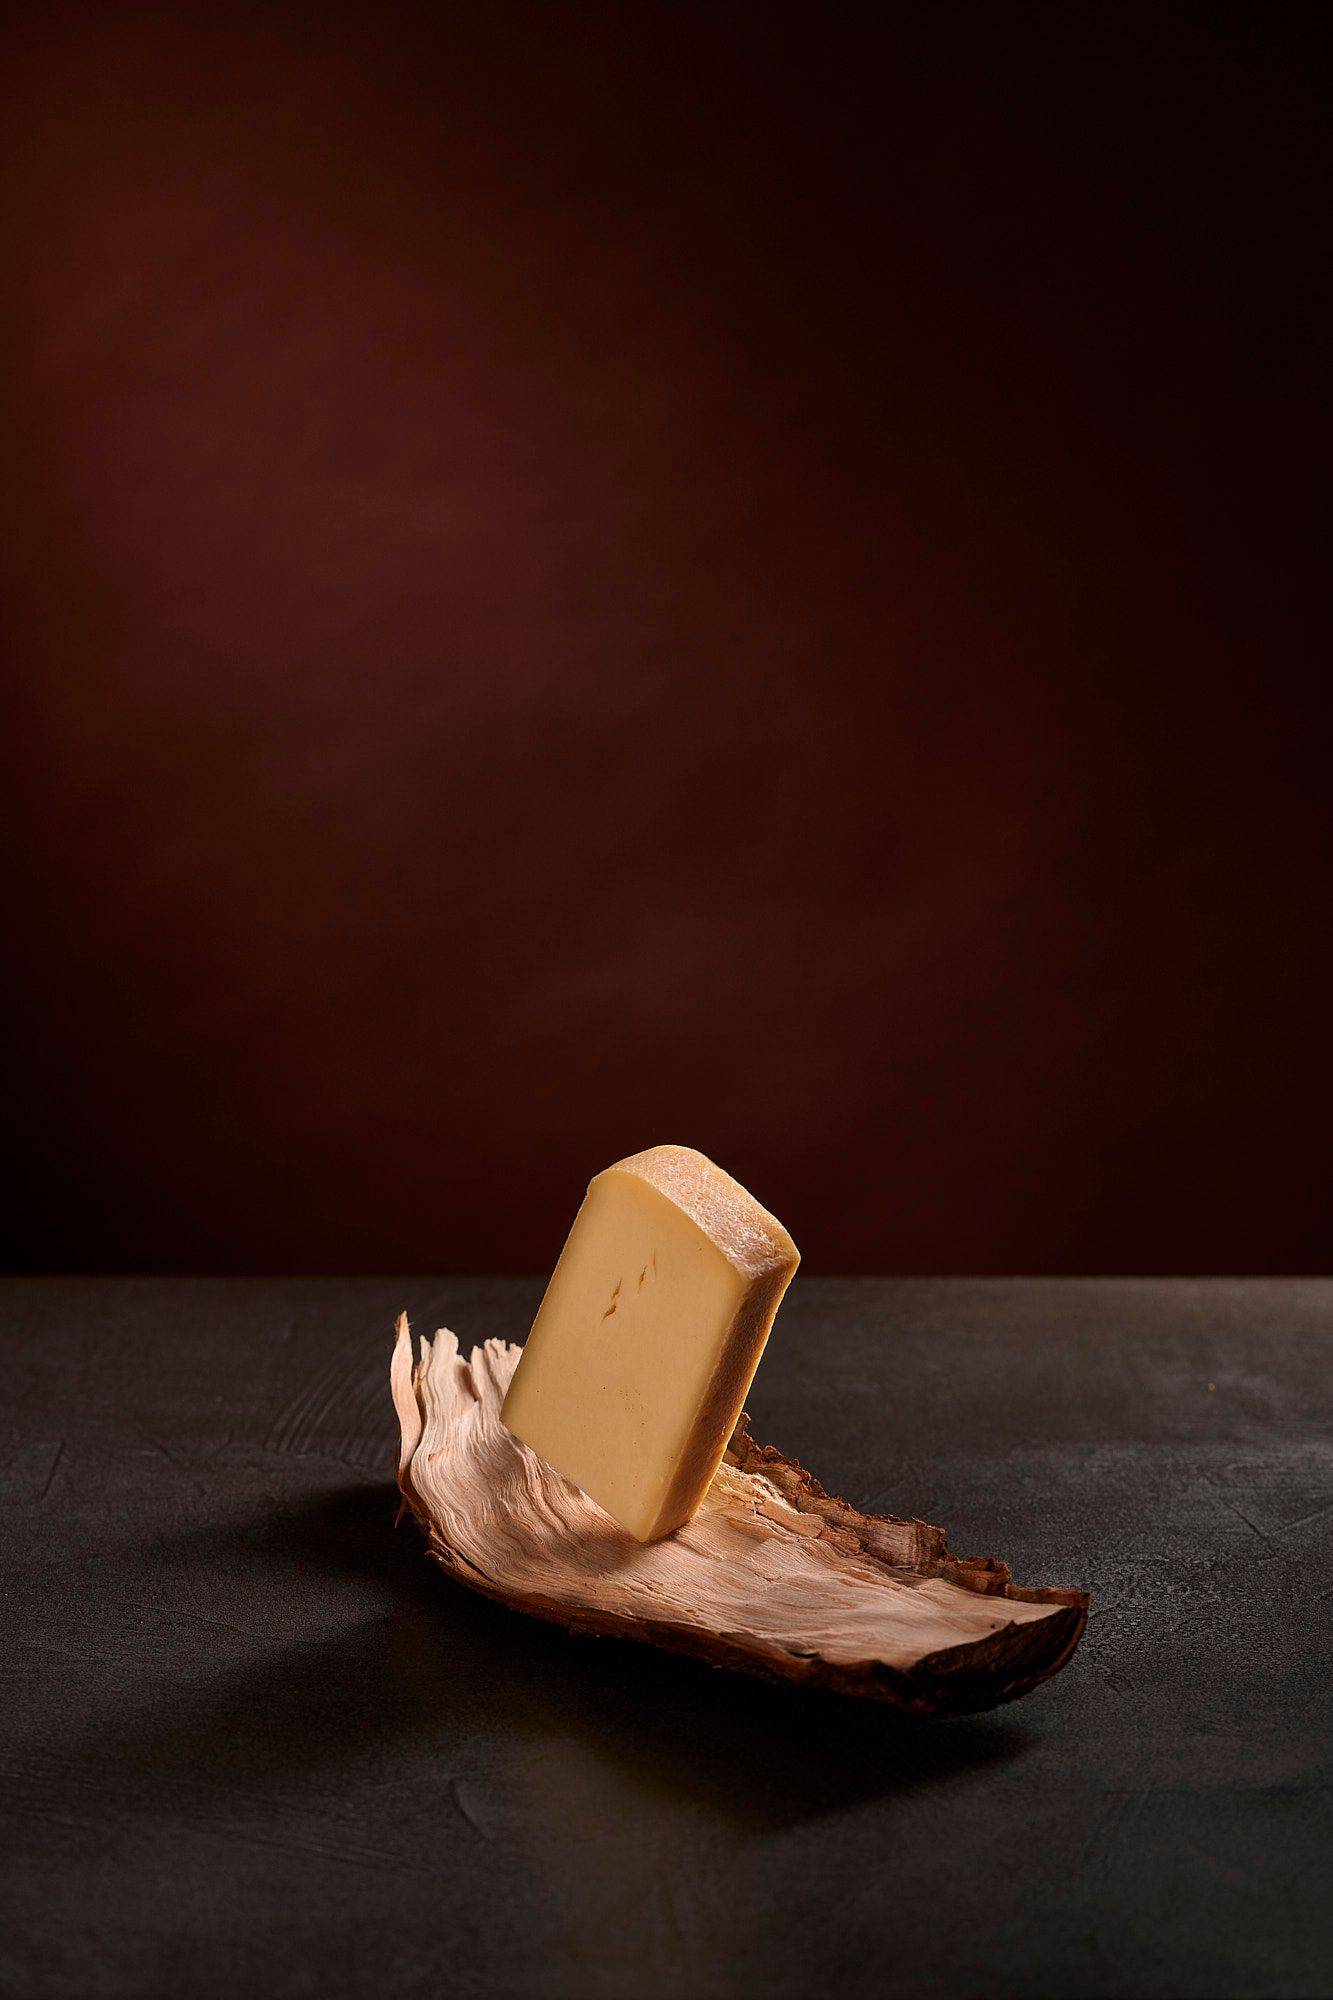 raclette cheese on wood with brown background